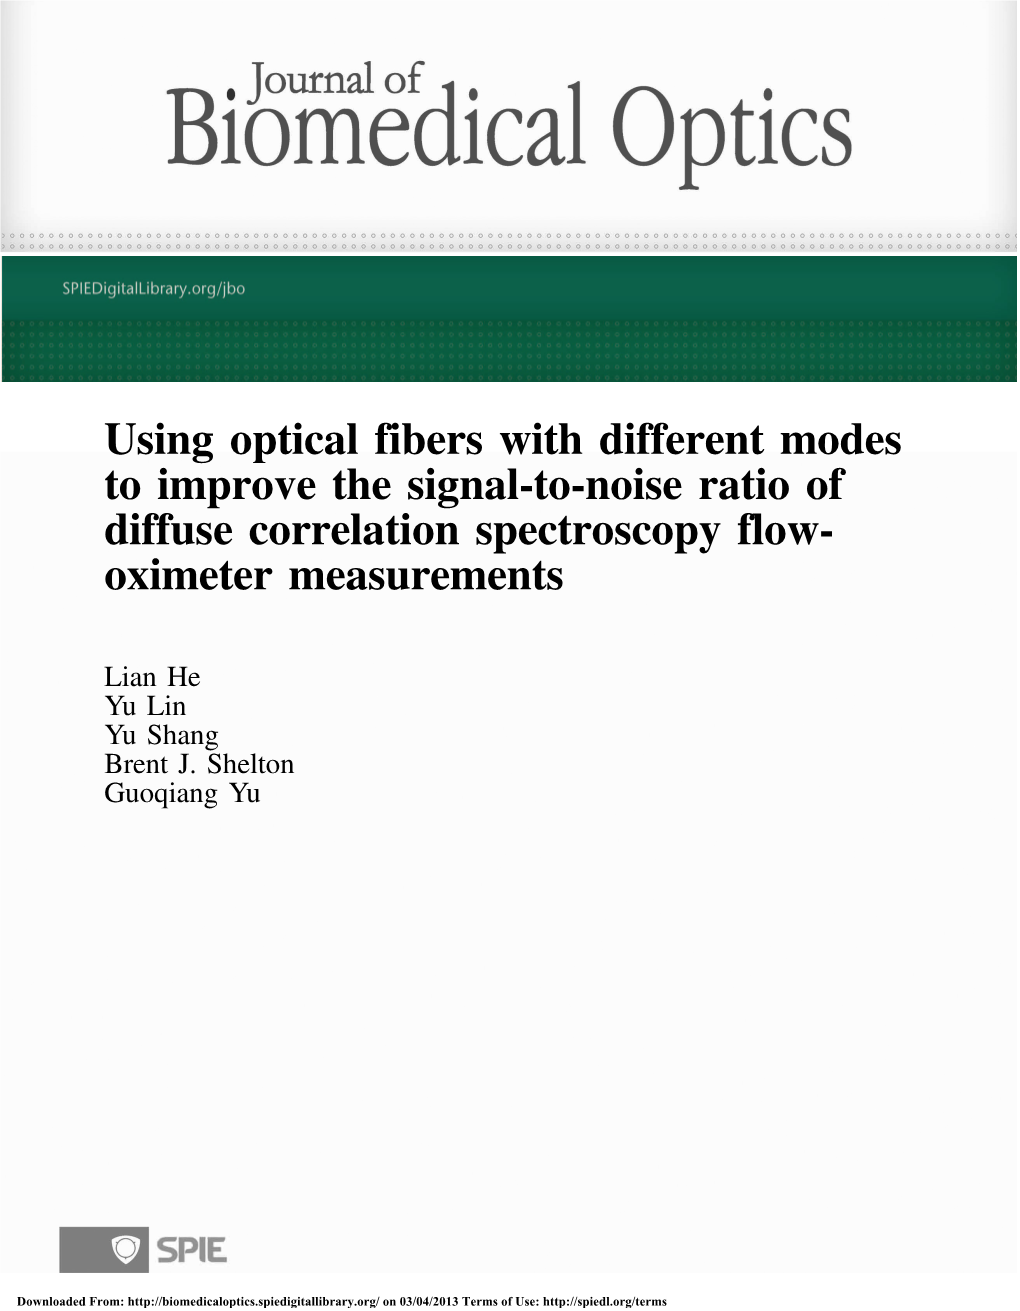 Using Optical Fibers with Different Modes to Improve the Signal-To-Noise Ratio of Diffuse Correlation Spectroscopy Flow- Oximeter Measurements